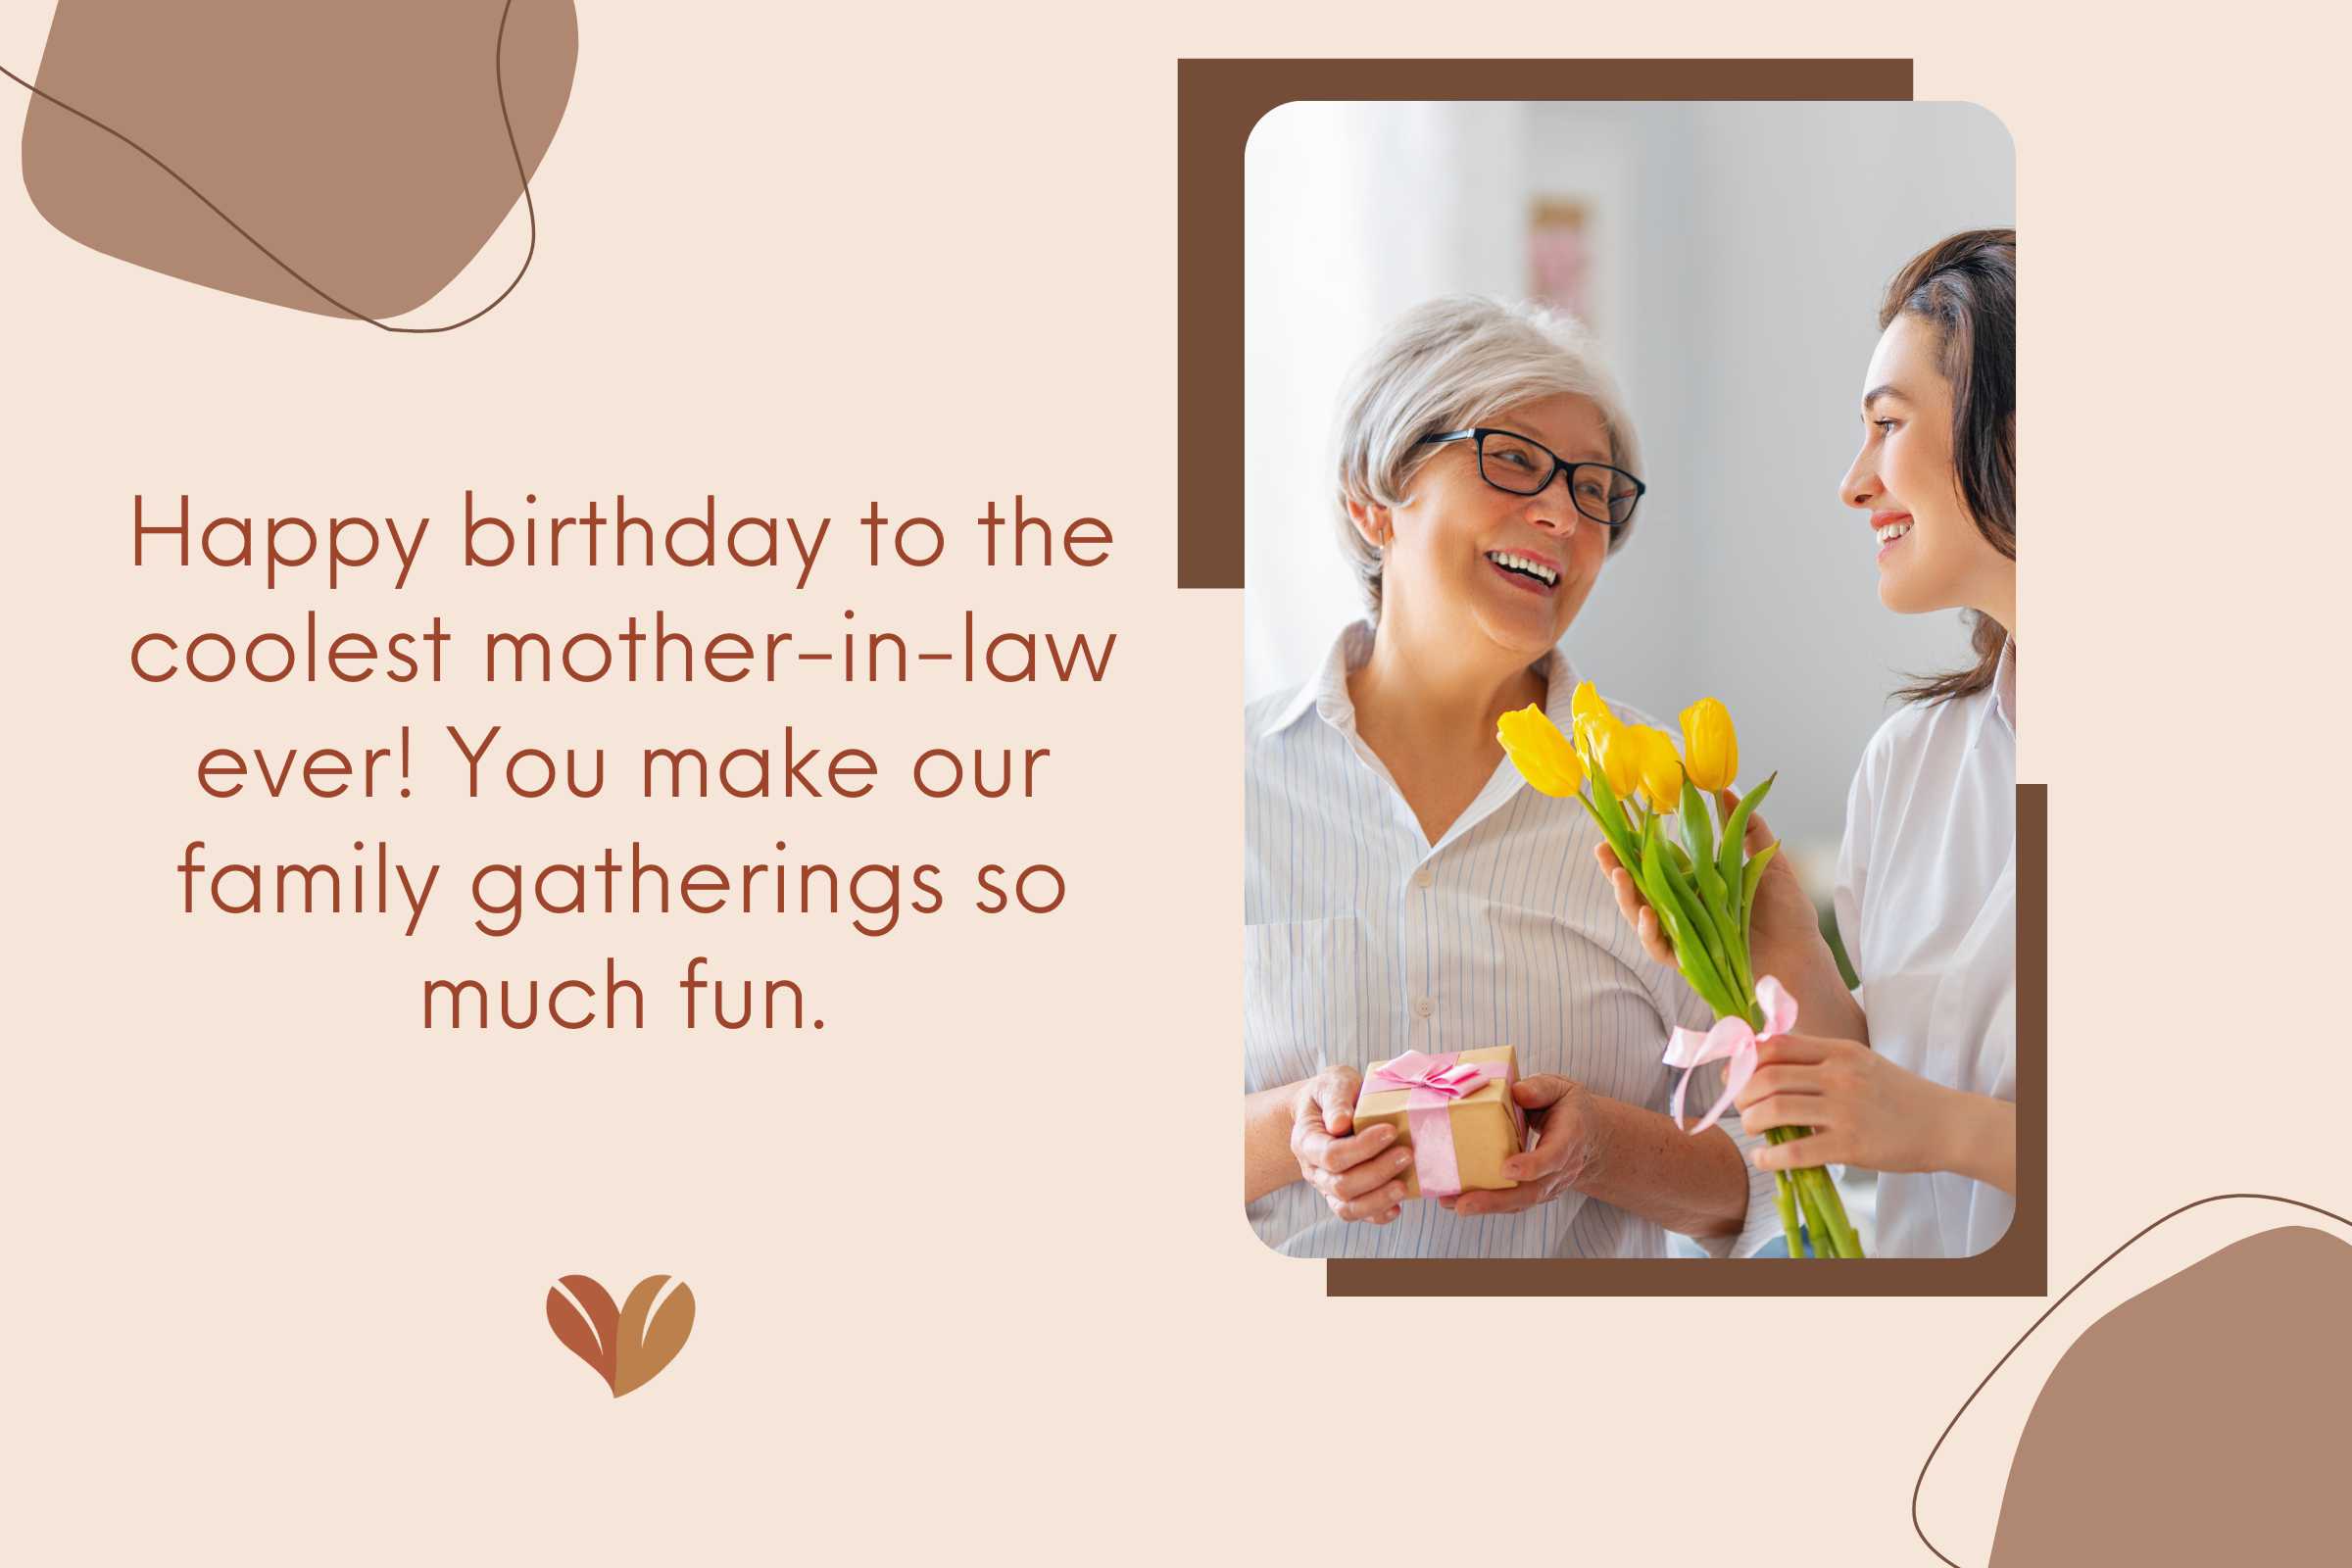 Hope your birthday is as fabulous as you are - Birthday quotes for mother-in-law